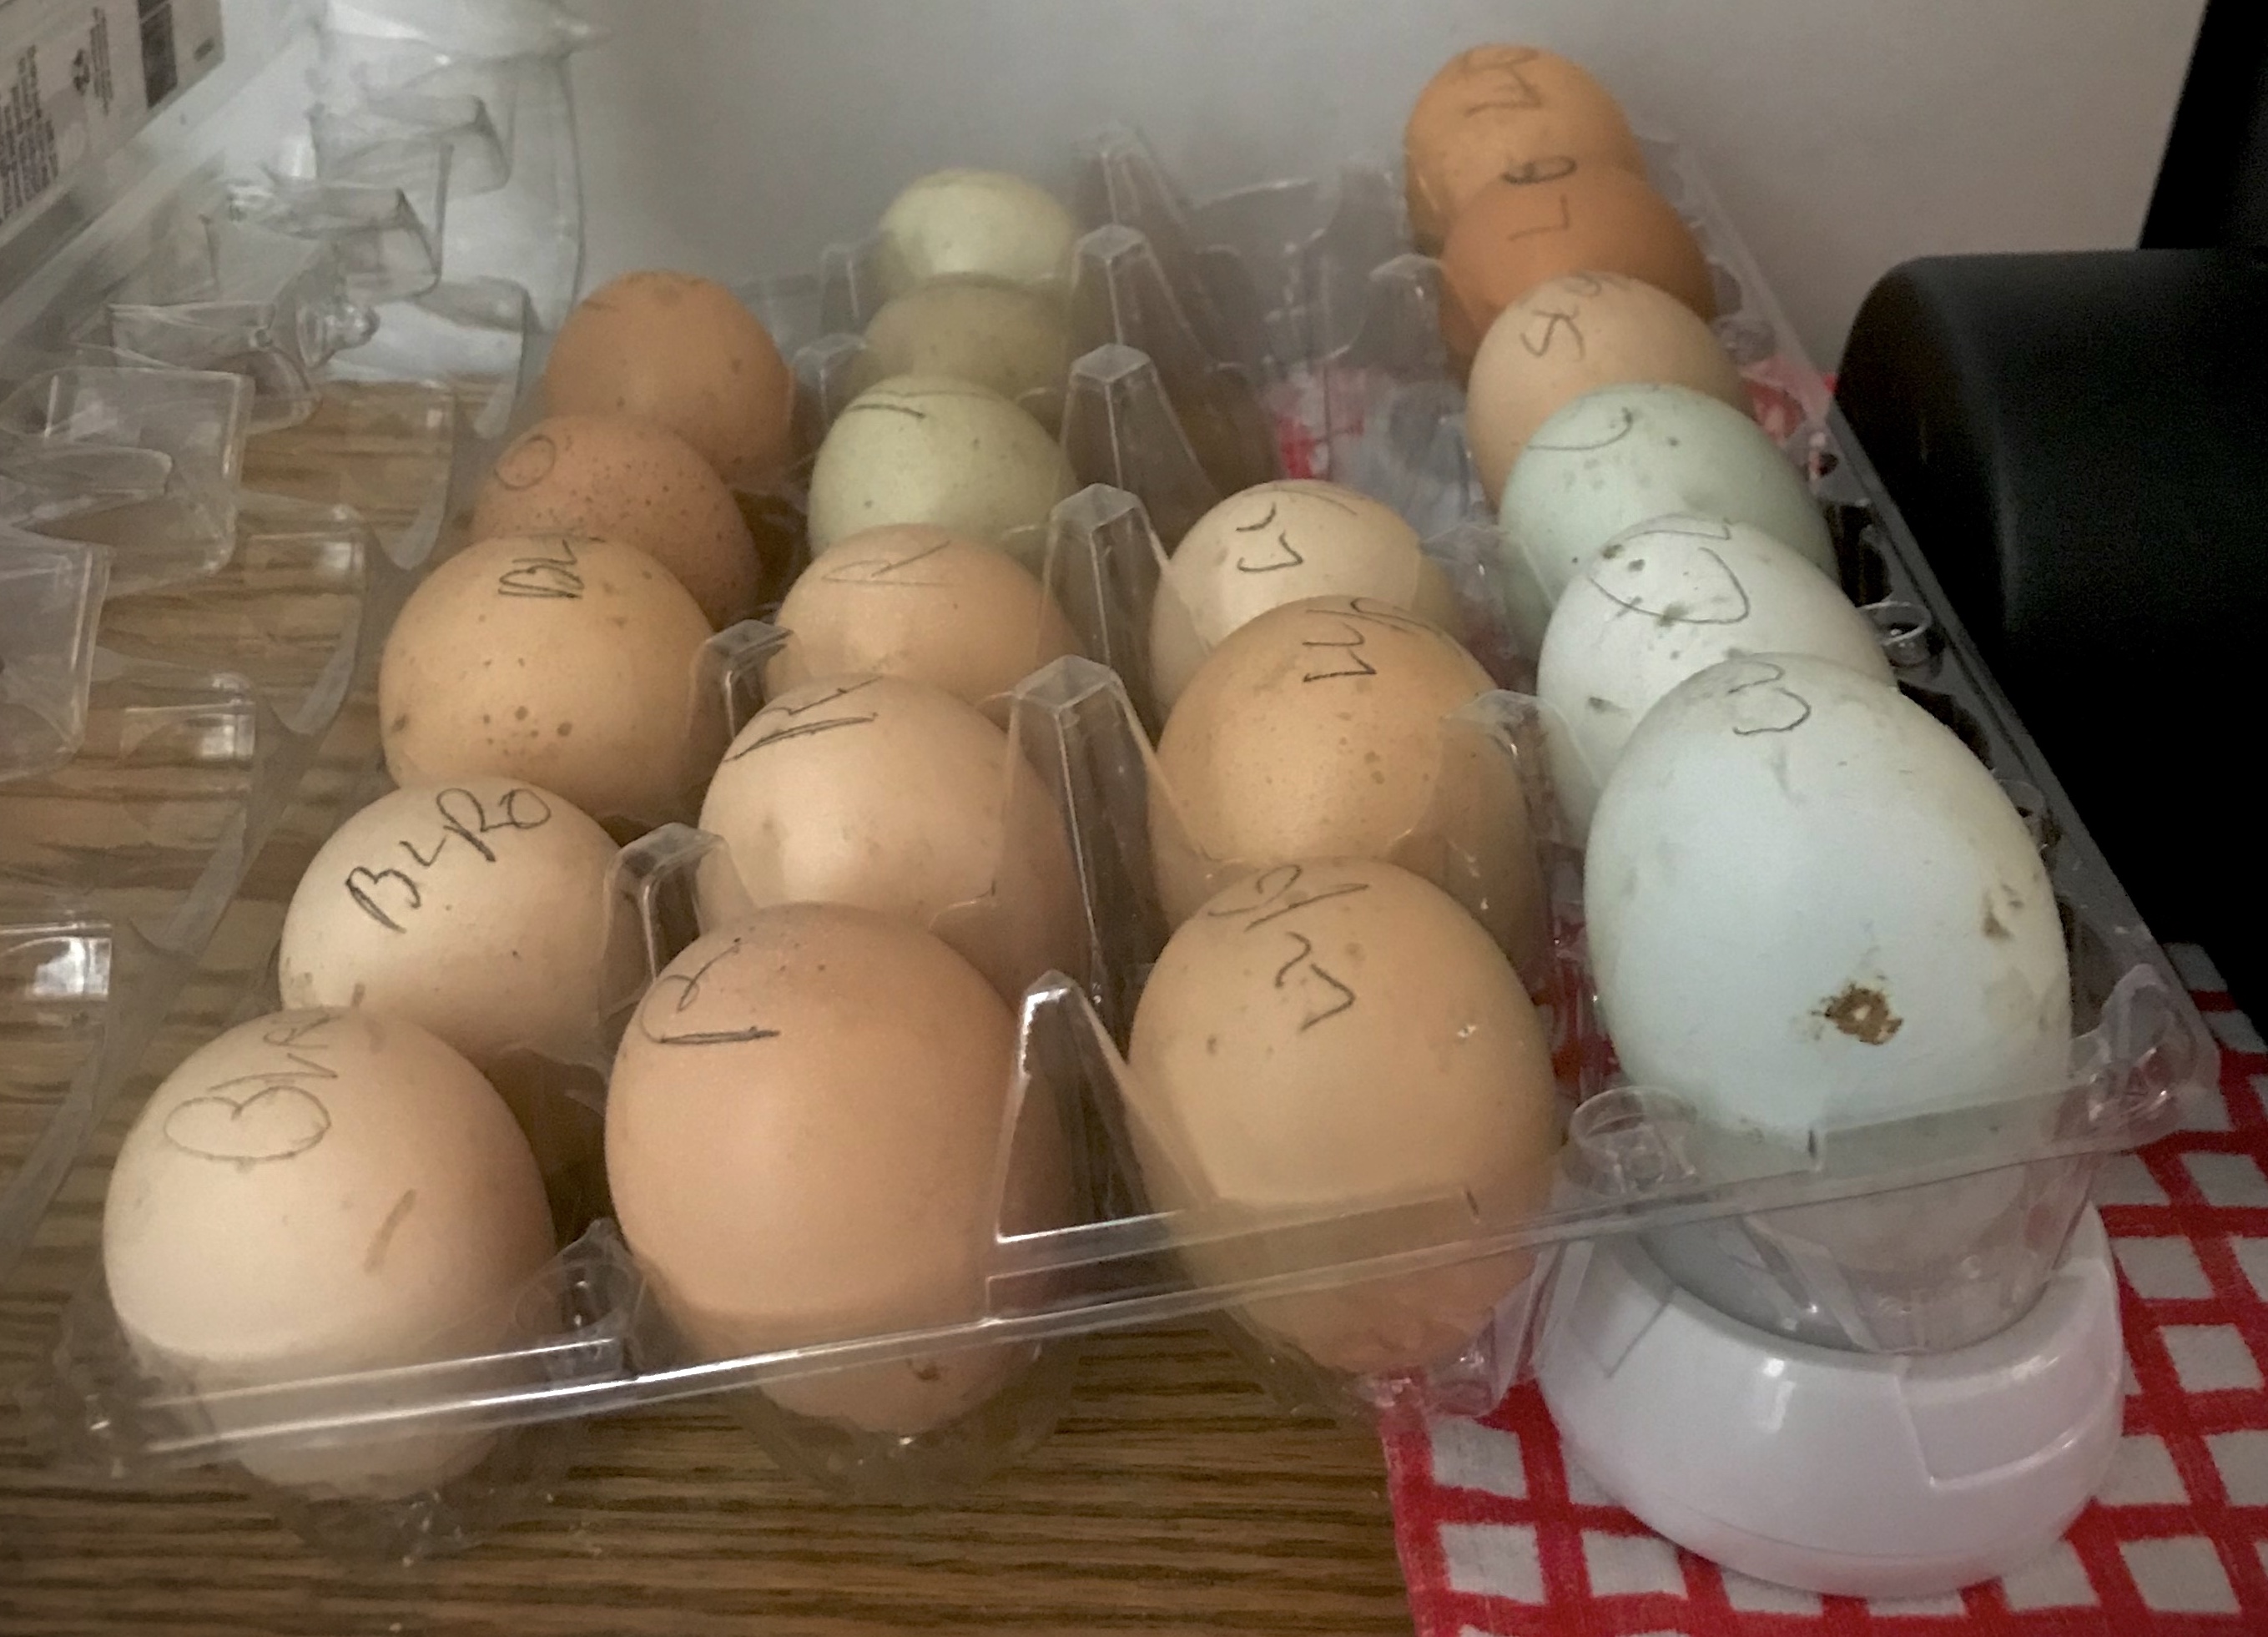 rotate eggs 45 degrees a few times a day. shipped eggs tilted for 24 hours prior to incubation